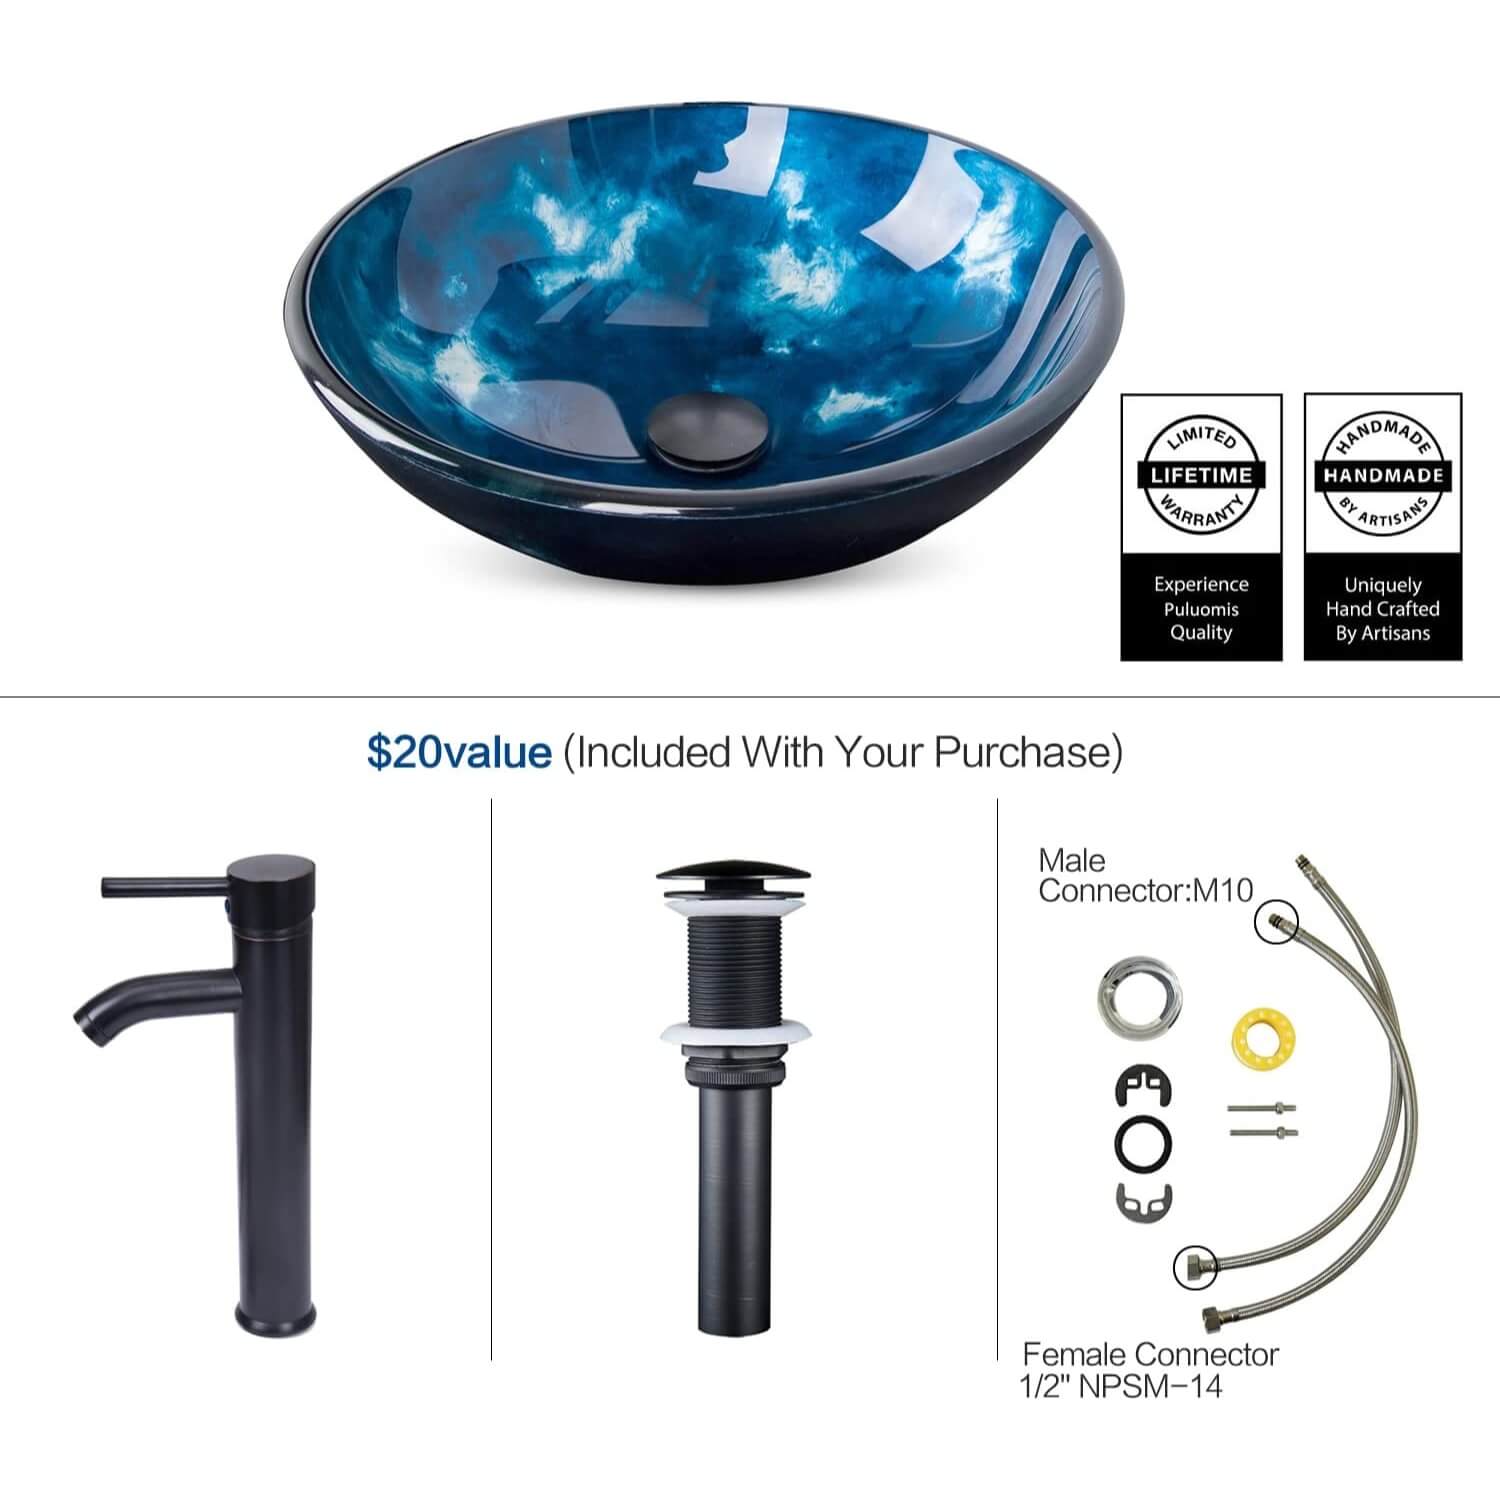 Elecwish blue glass sink with component